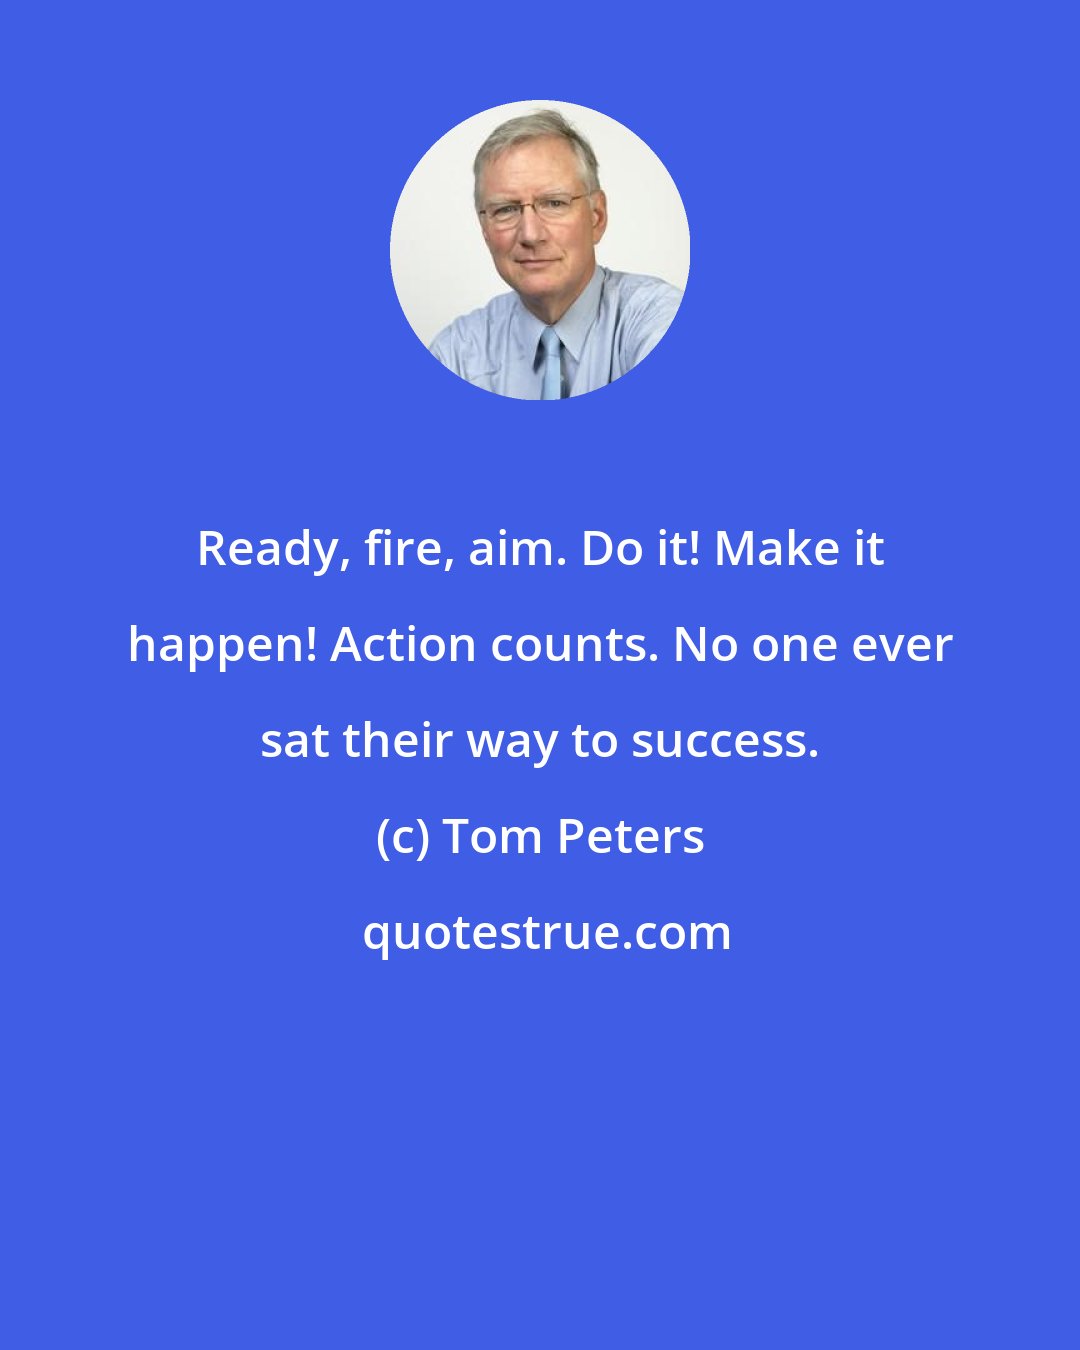 Tom Peters: Ready, fire, aim. Do it! Make it happen! Action counts. No one ever sat their way to success.